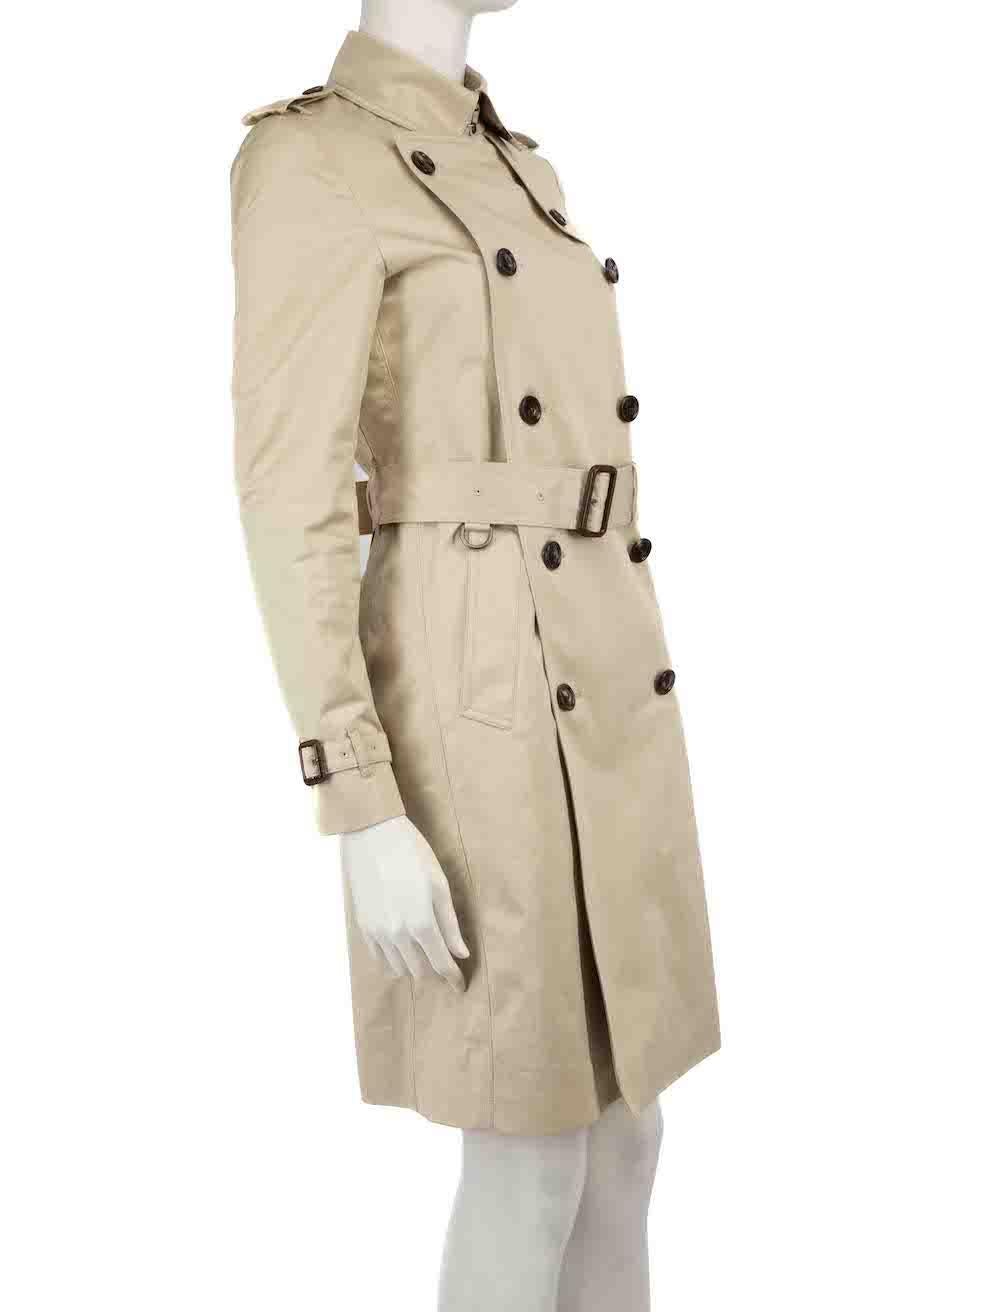 CONDITION is Very good. Minimal wear to coat is evident. Minimal wear to both sleeves with light marks on this used Burberry designer resale item.
 
 Details
 The Kensington model
 Beige
 Cotton
 Trench coat
 Mid length
 Double breasted
 2x Front